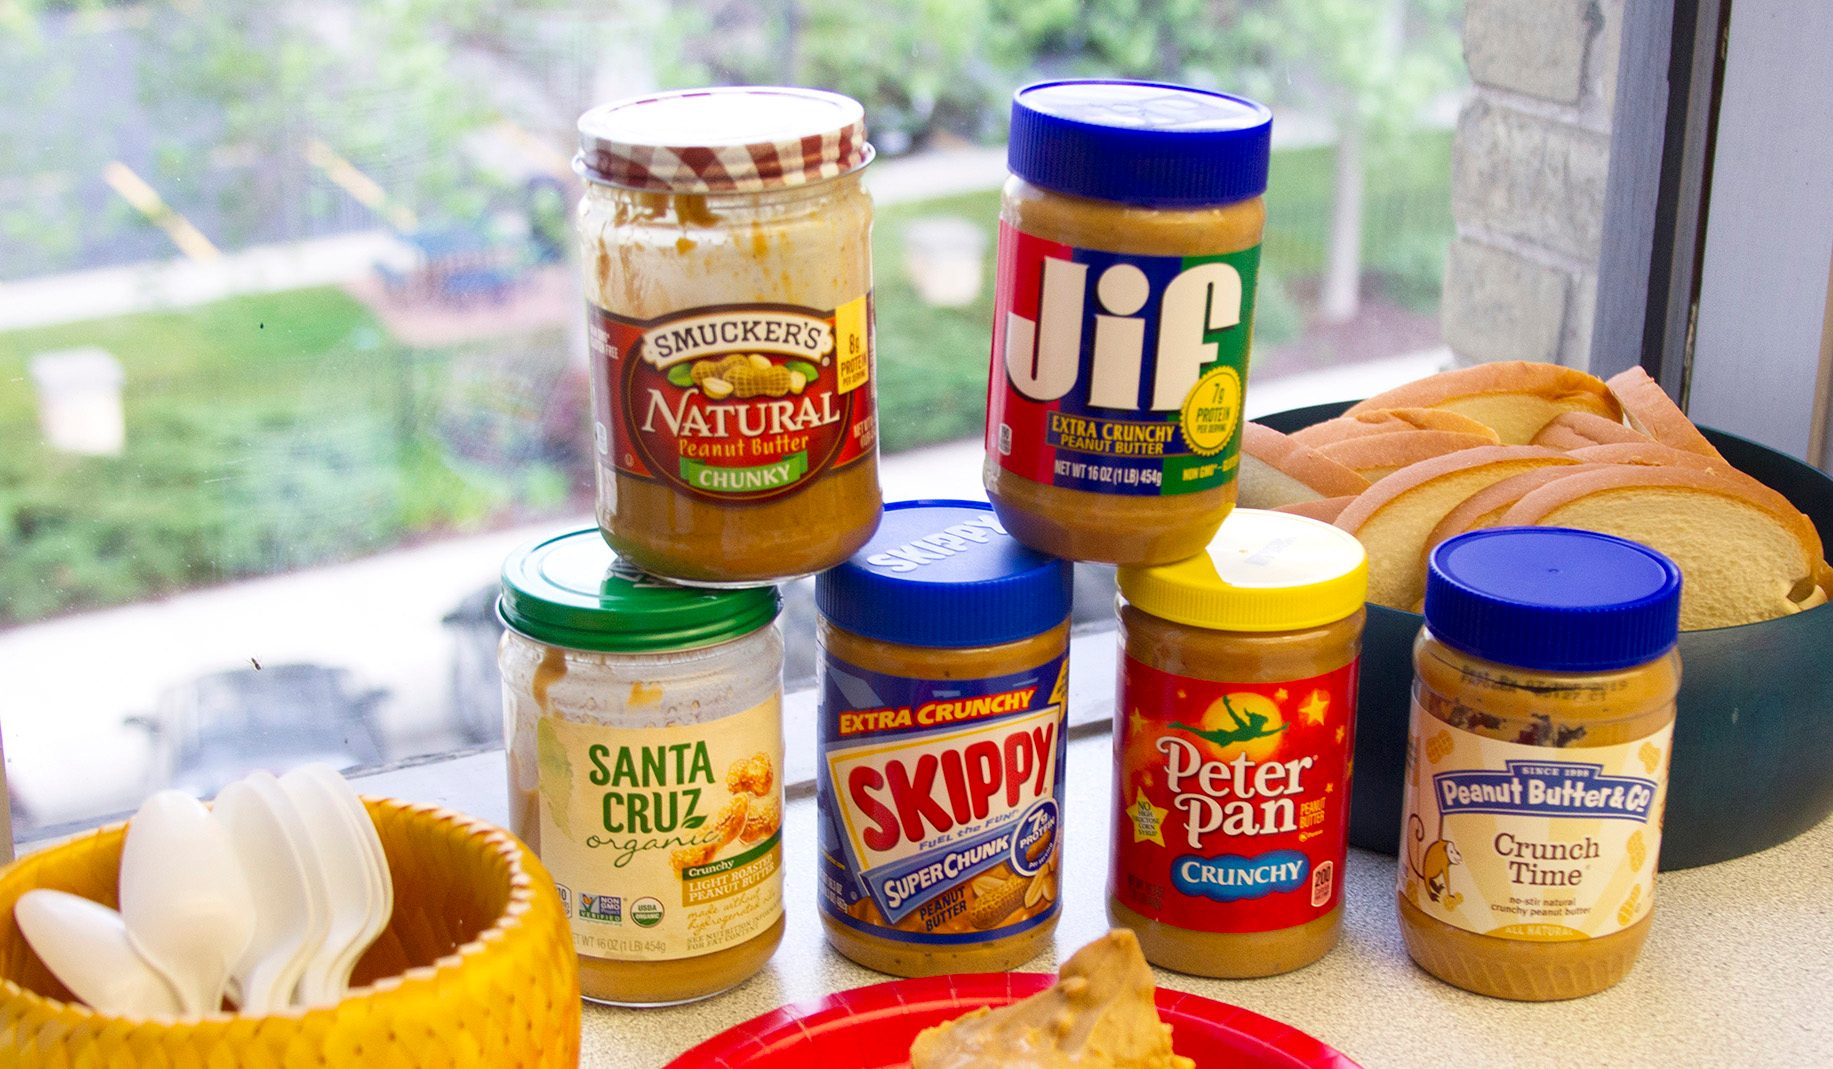 Find Out The Results To Our Chunky Peanut Butter Taste Test